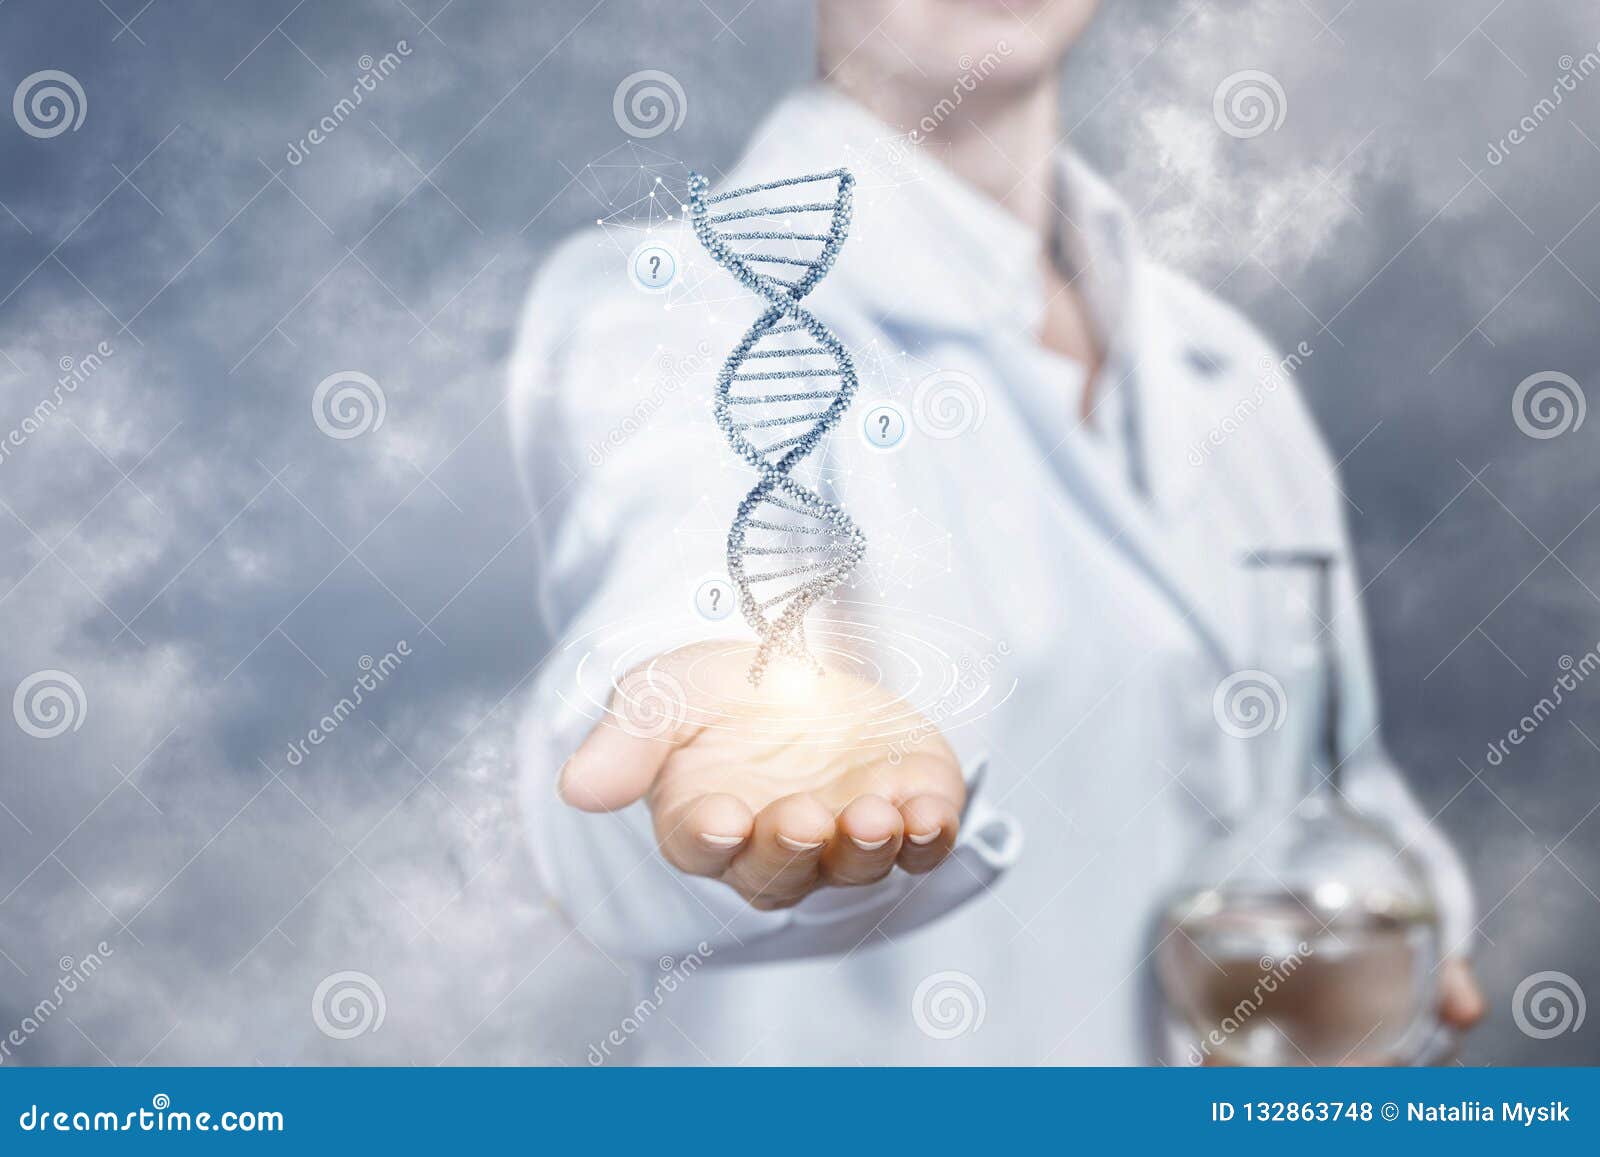 the concept is the innovations in dna researches